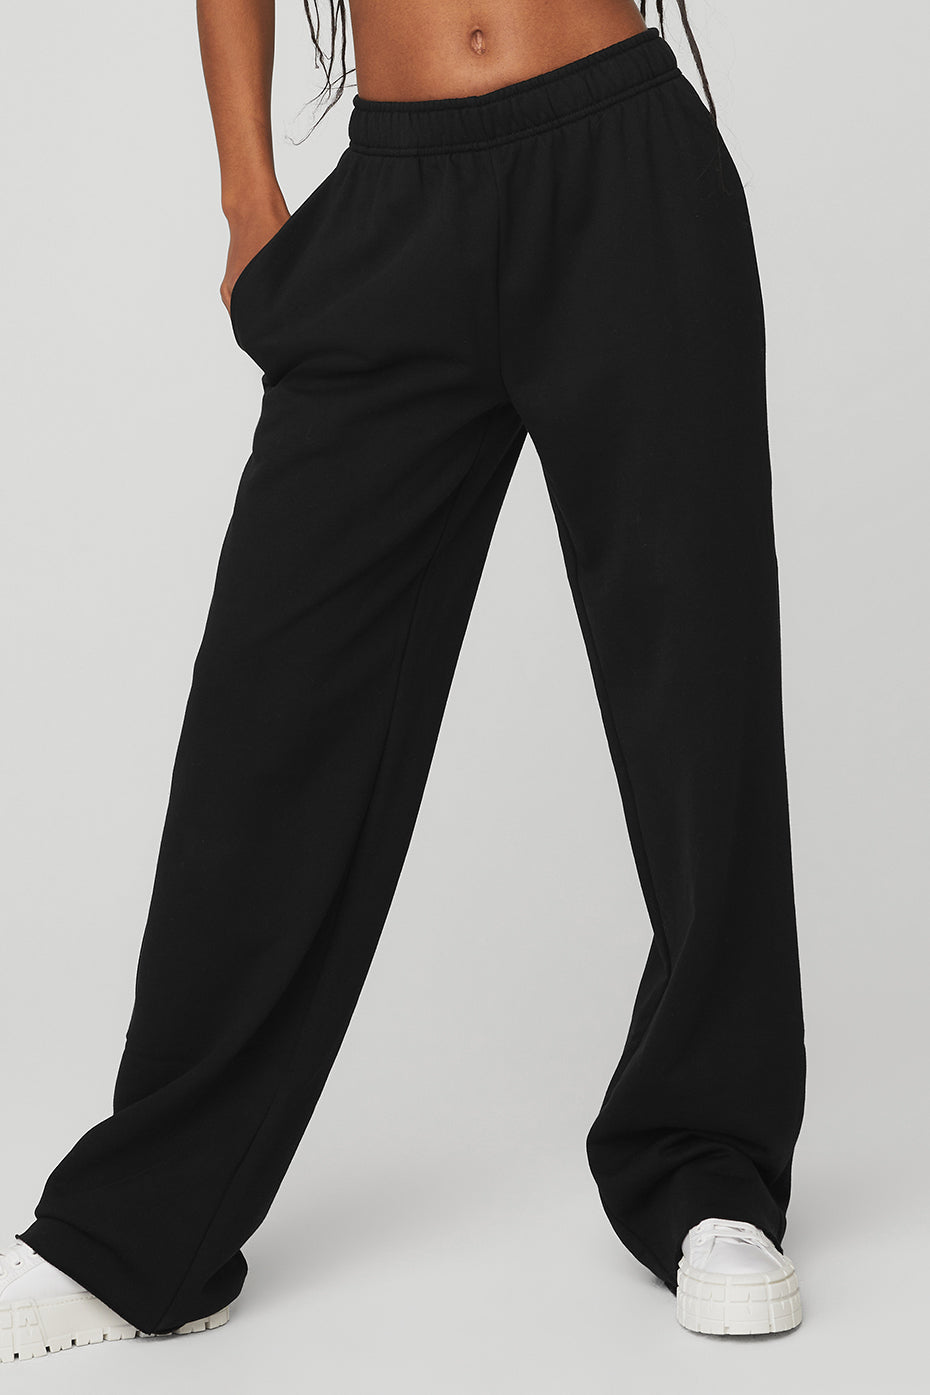 Puddle Sweatpant in Black by Alo Yoga - International Design Forum